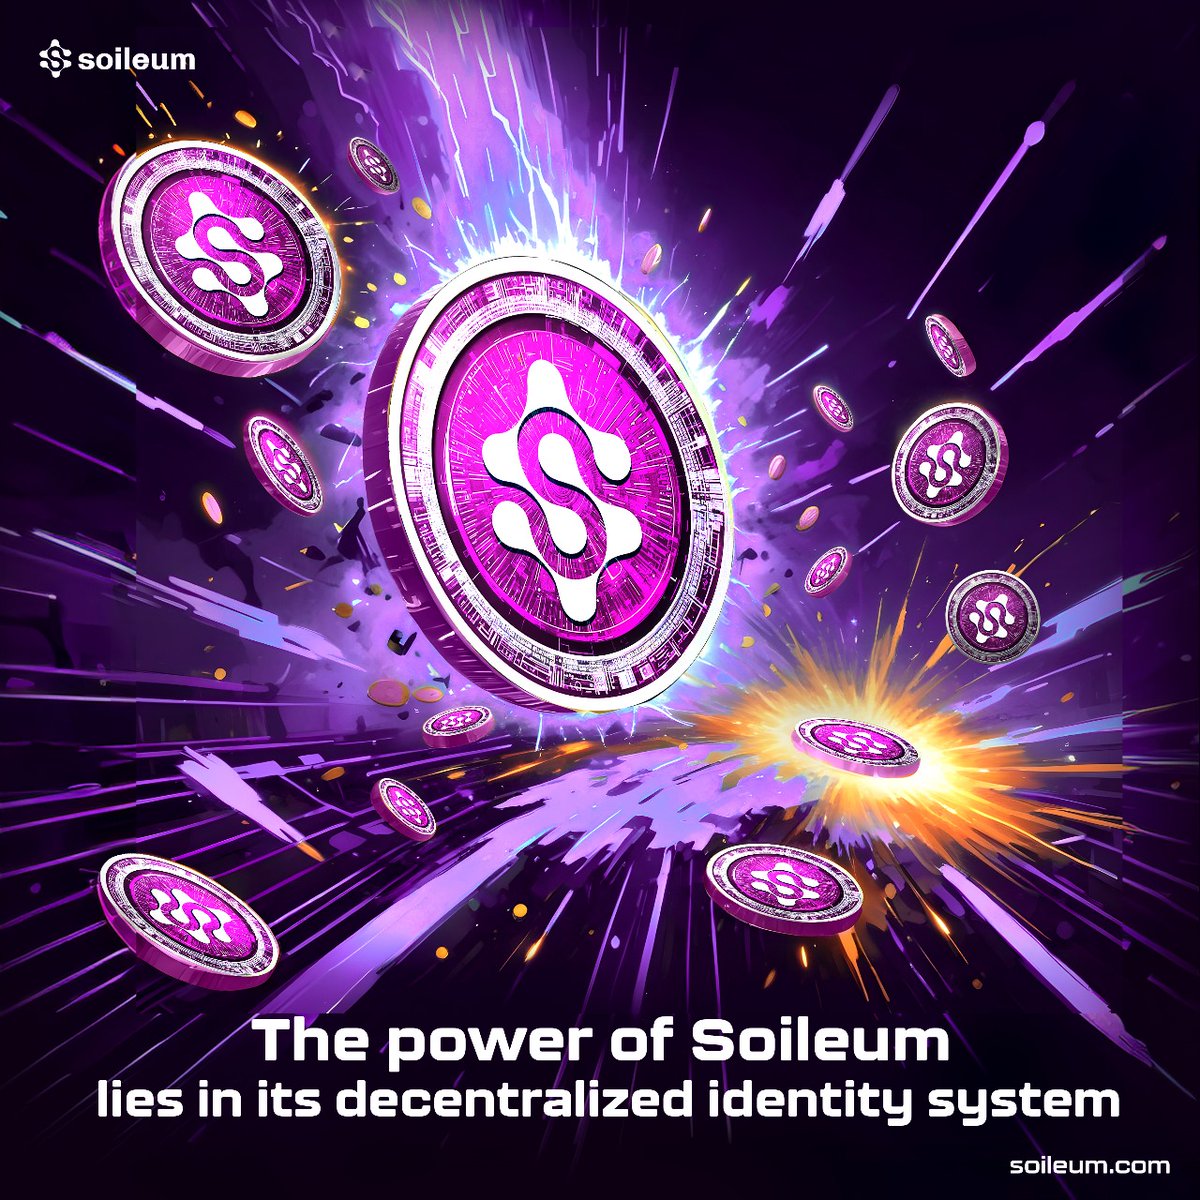 The power of Soileum lies in its decentralized identity system, granting you full control over your personal data and enabling secure management and sharing of your identity.

#IdentityPortability #DecentralizedIdentity #SOIL